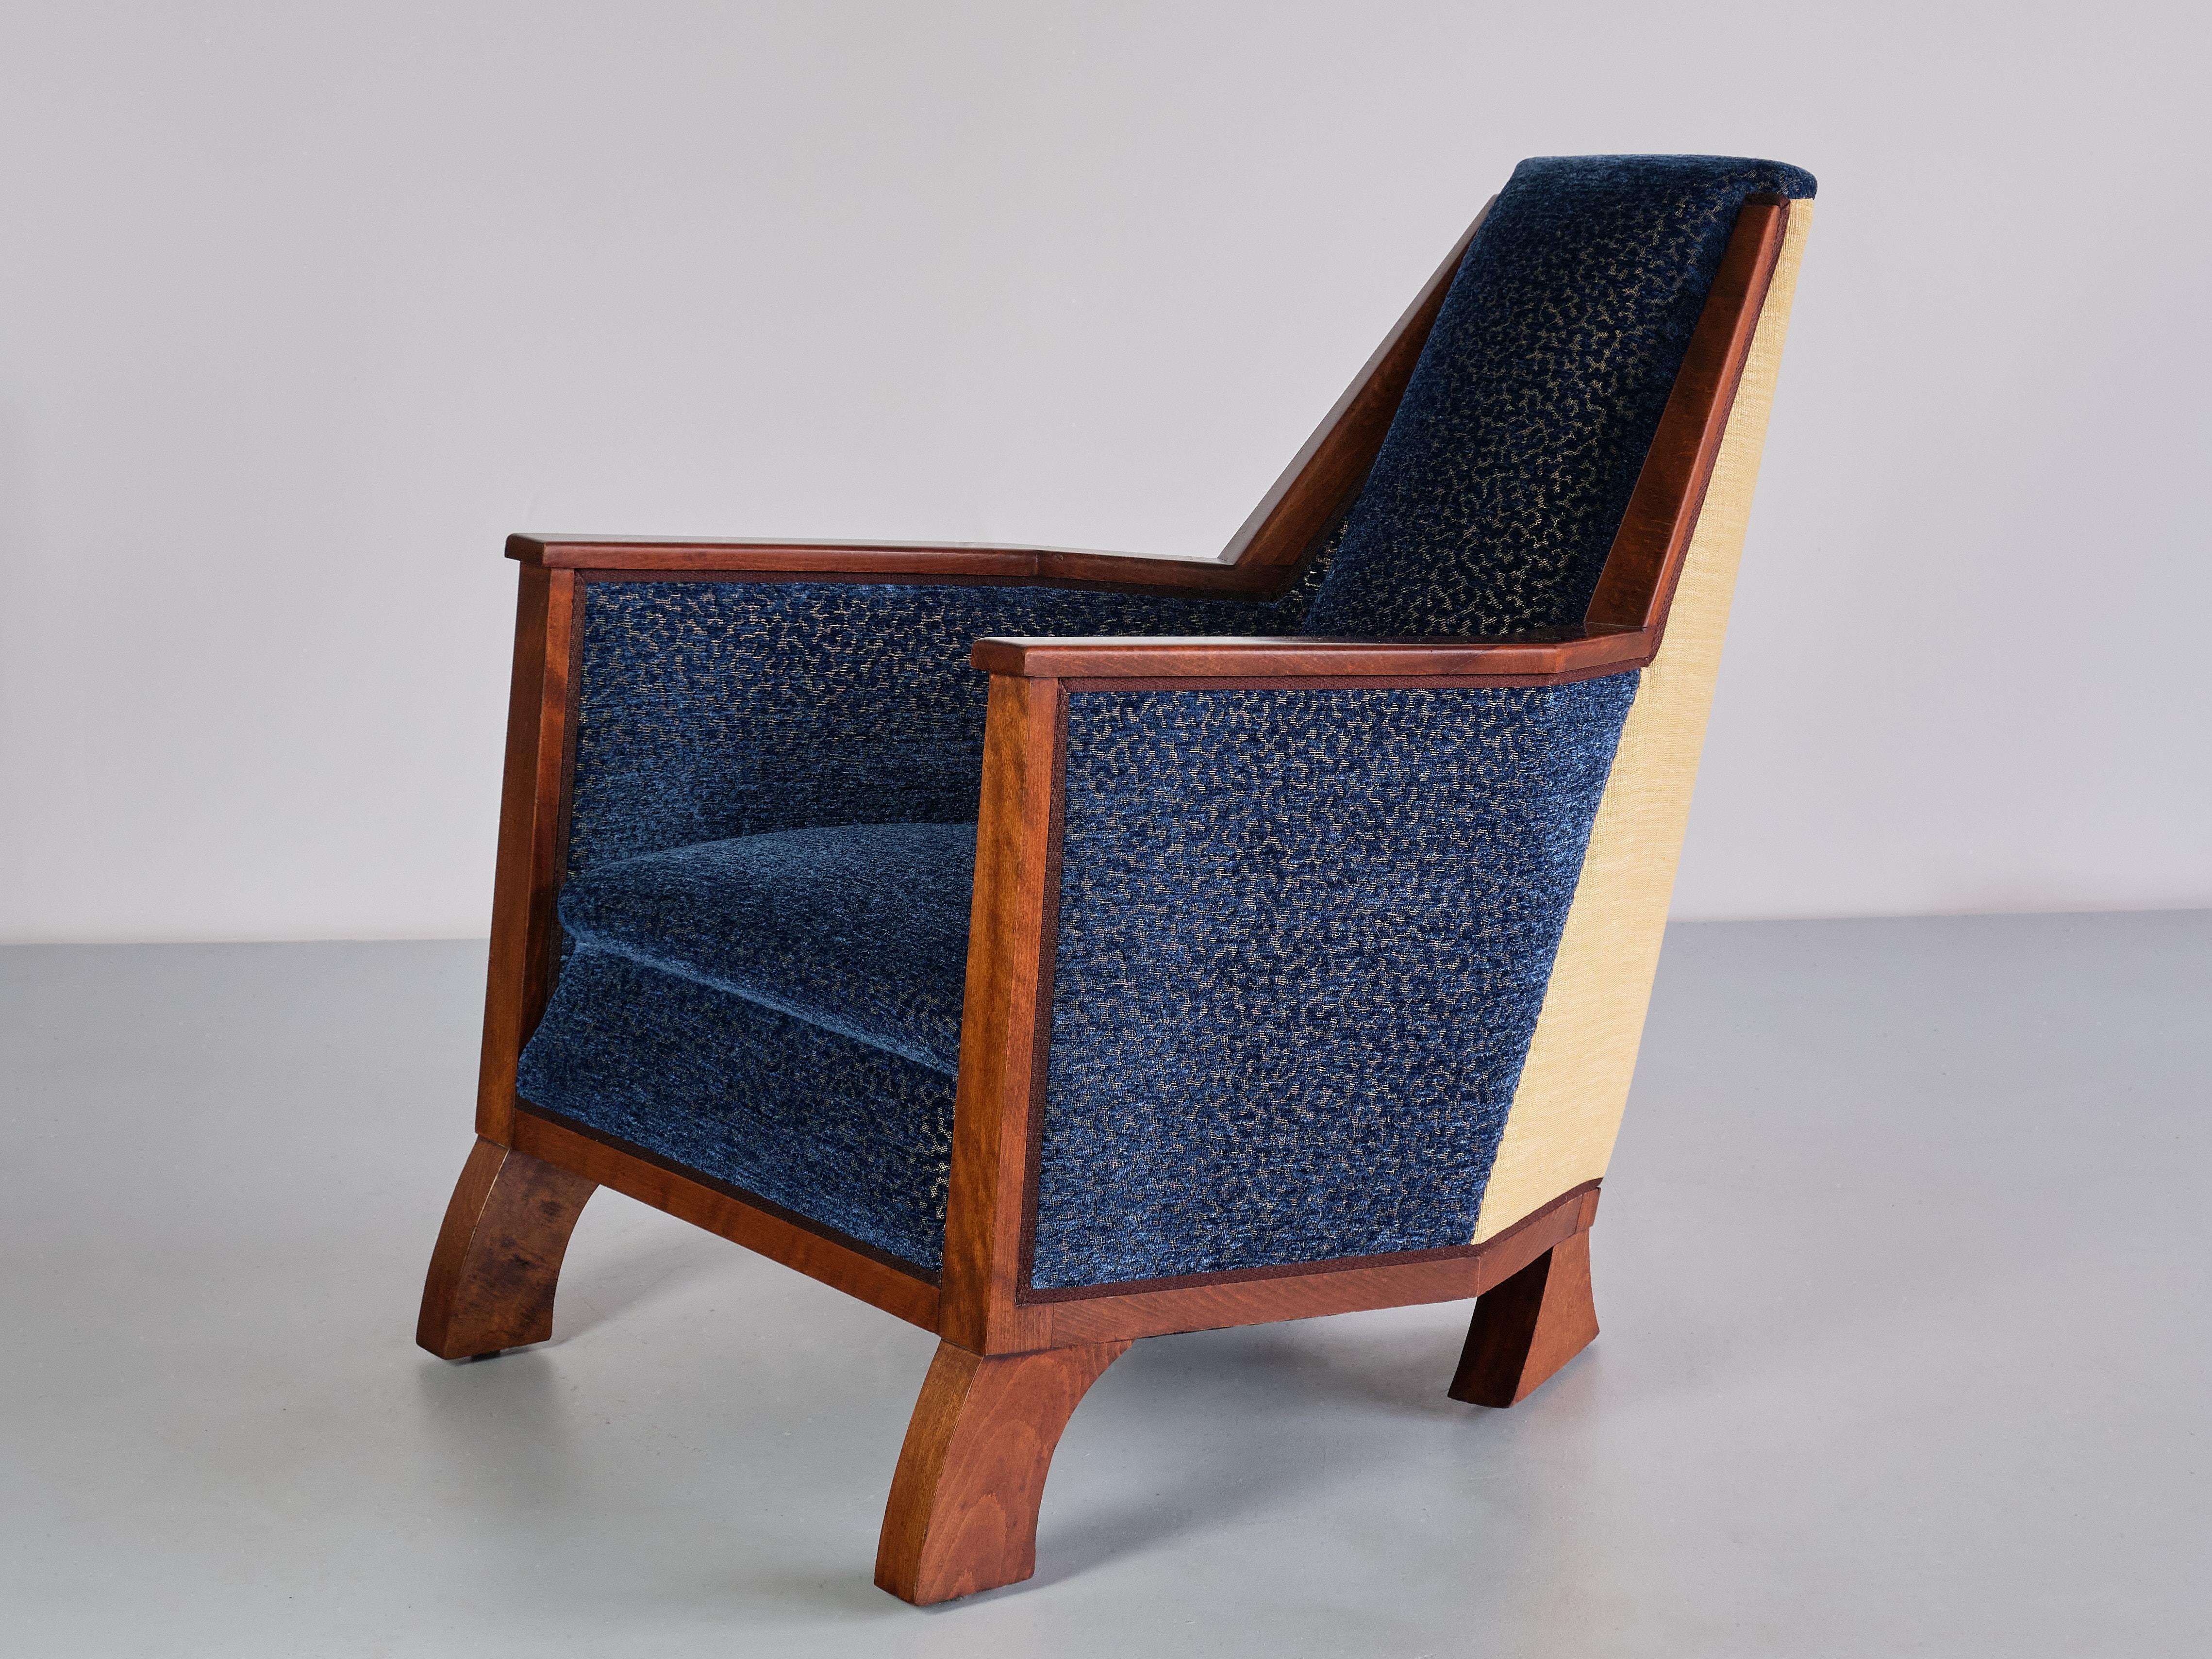 Exceptional Art Deco Arm Chair in Blue Velvet and Maple, Northern France, 1920s For Sale 10